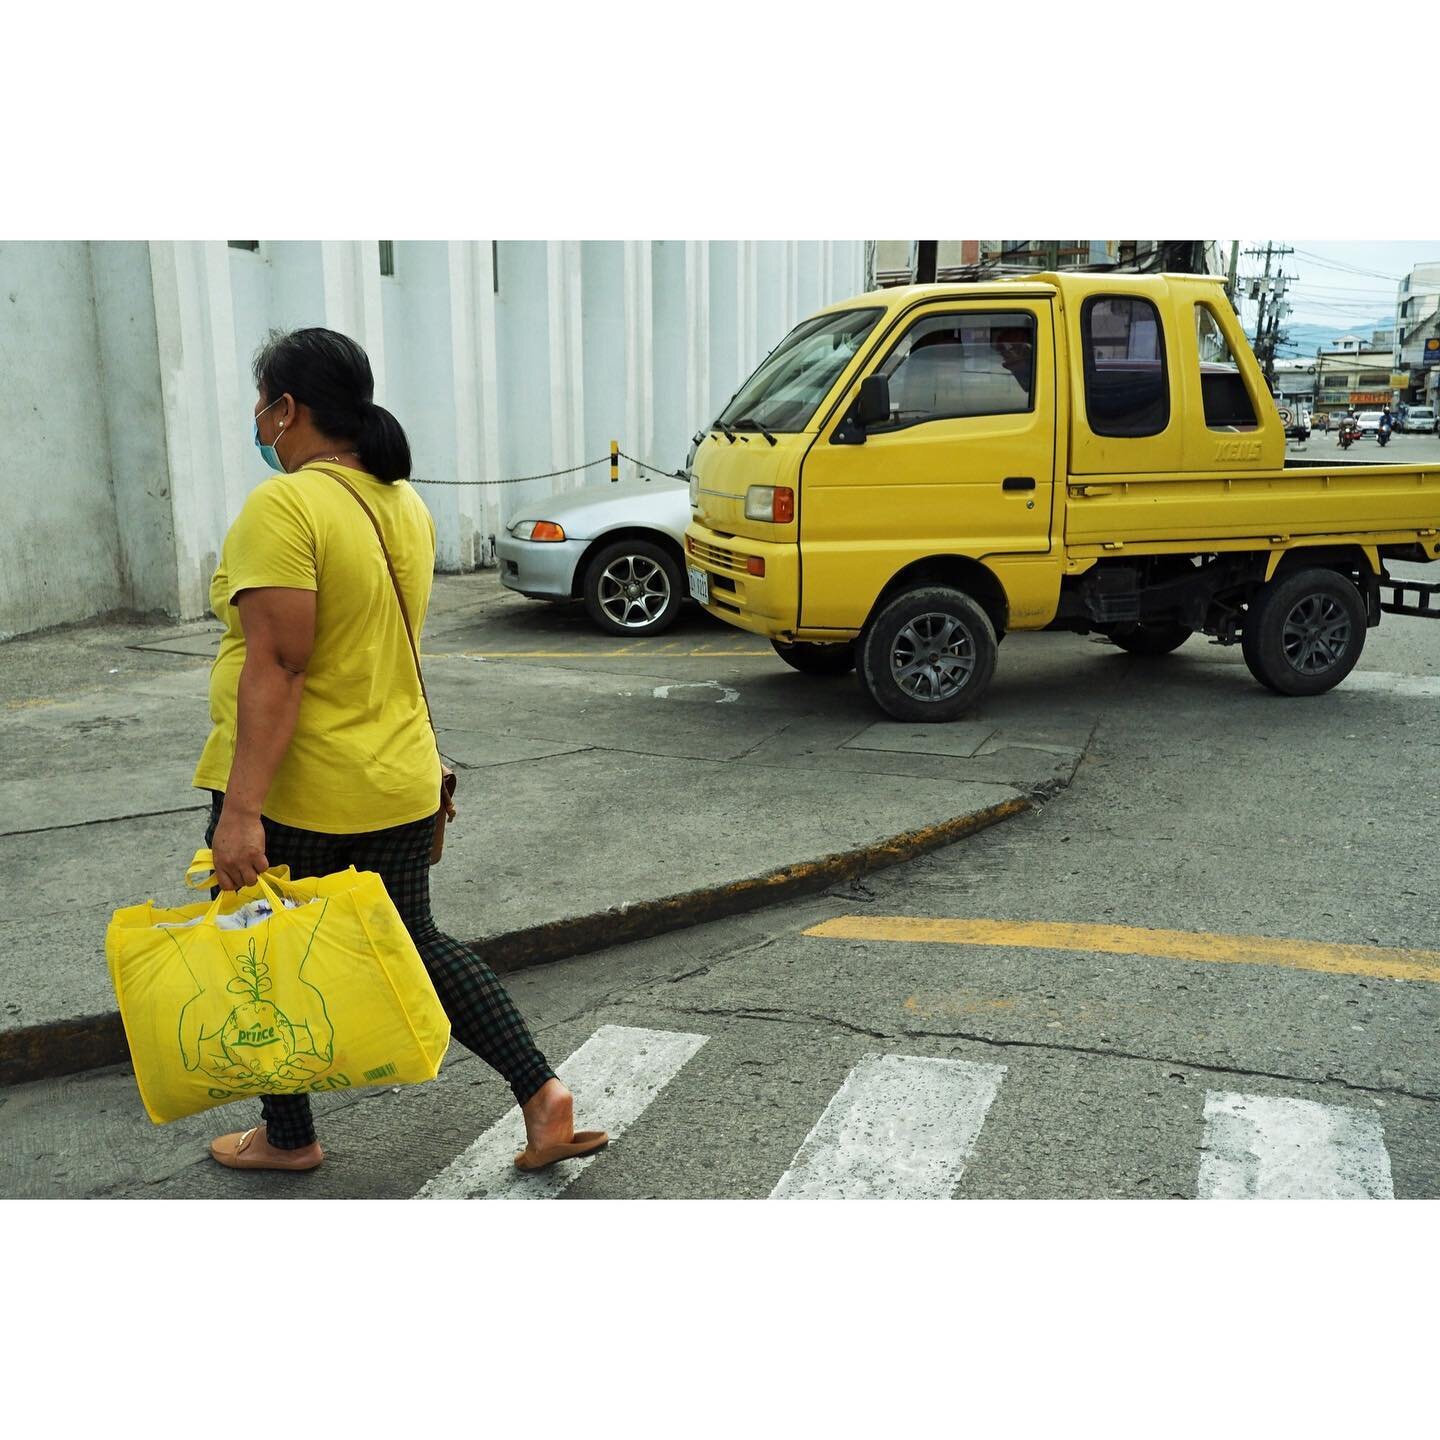 when life gives you lemon yellow...🌞🍋💛
&bull;
Dumaguete, Philippines
2020
&bull;
&bull;
&bull;
CAM 0308
#CatchAMoment #6200street #fujifilm #spicollective #tdmmag #23mmf2wr #thephotosector #littleboxcollective #myspc #street_avengers #thepictorial